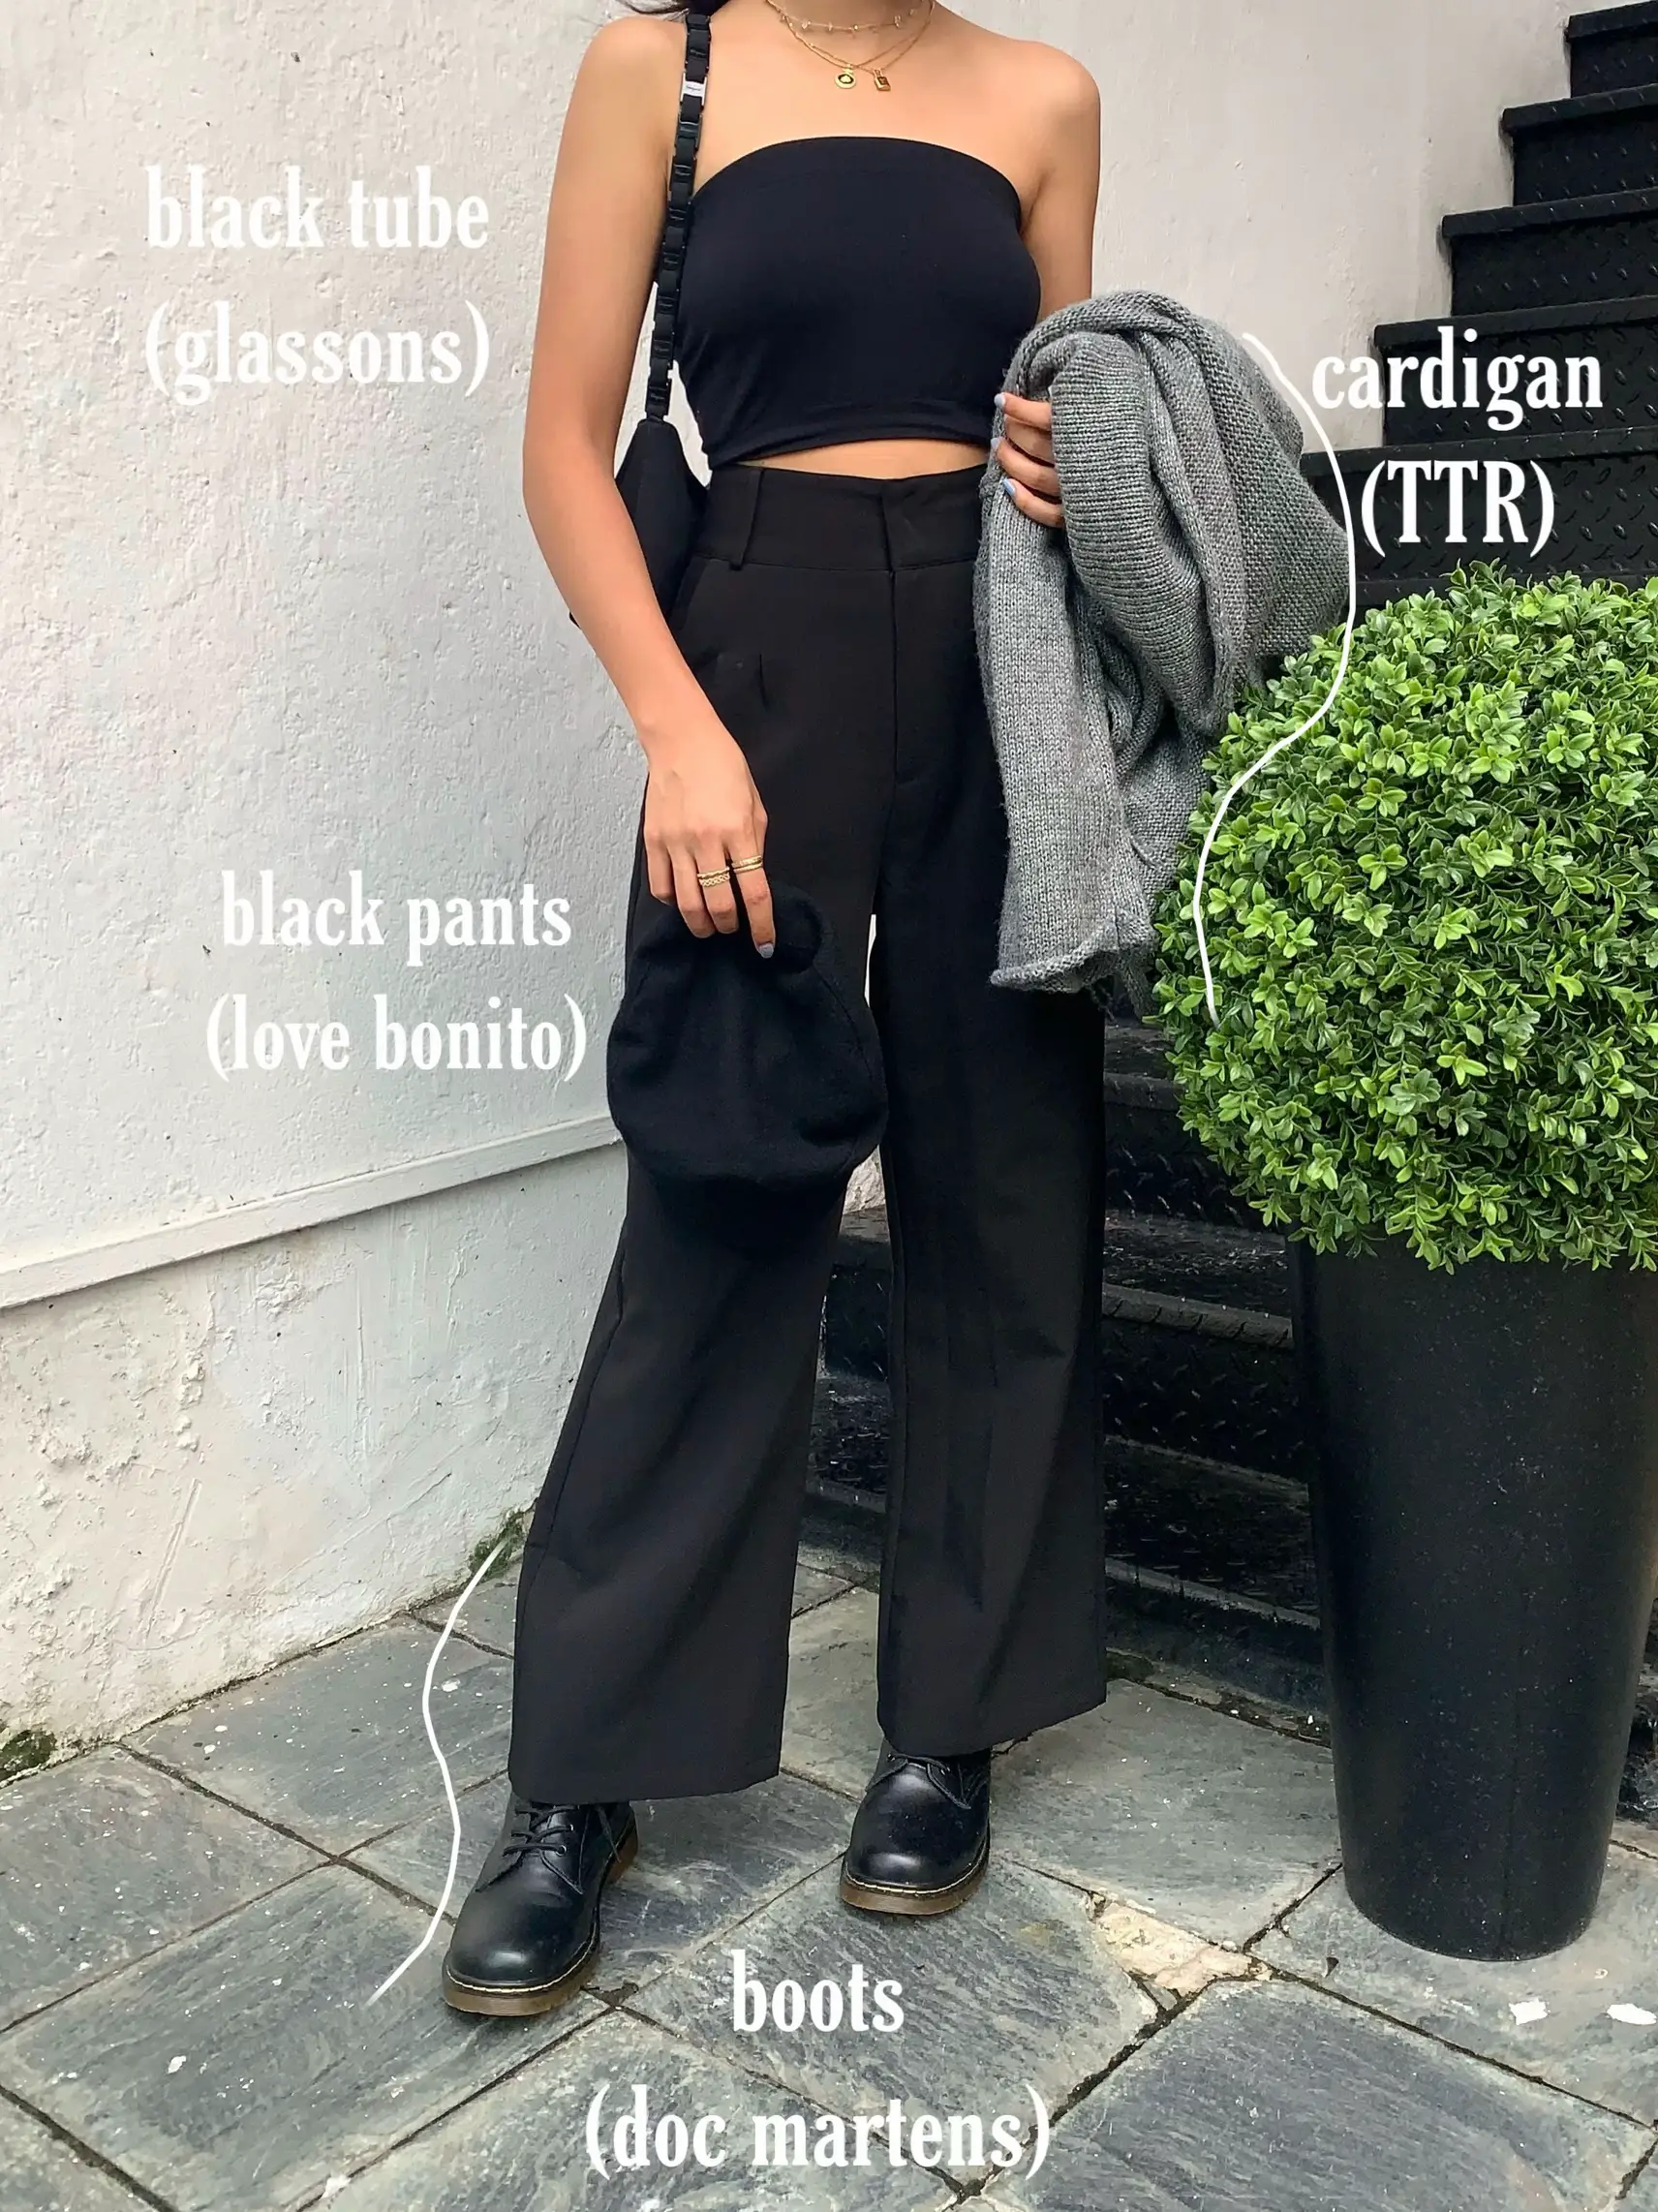 paris in singapore outfit inspo, Gallery posted by Crystal Tan